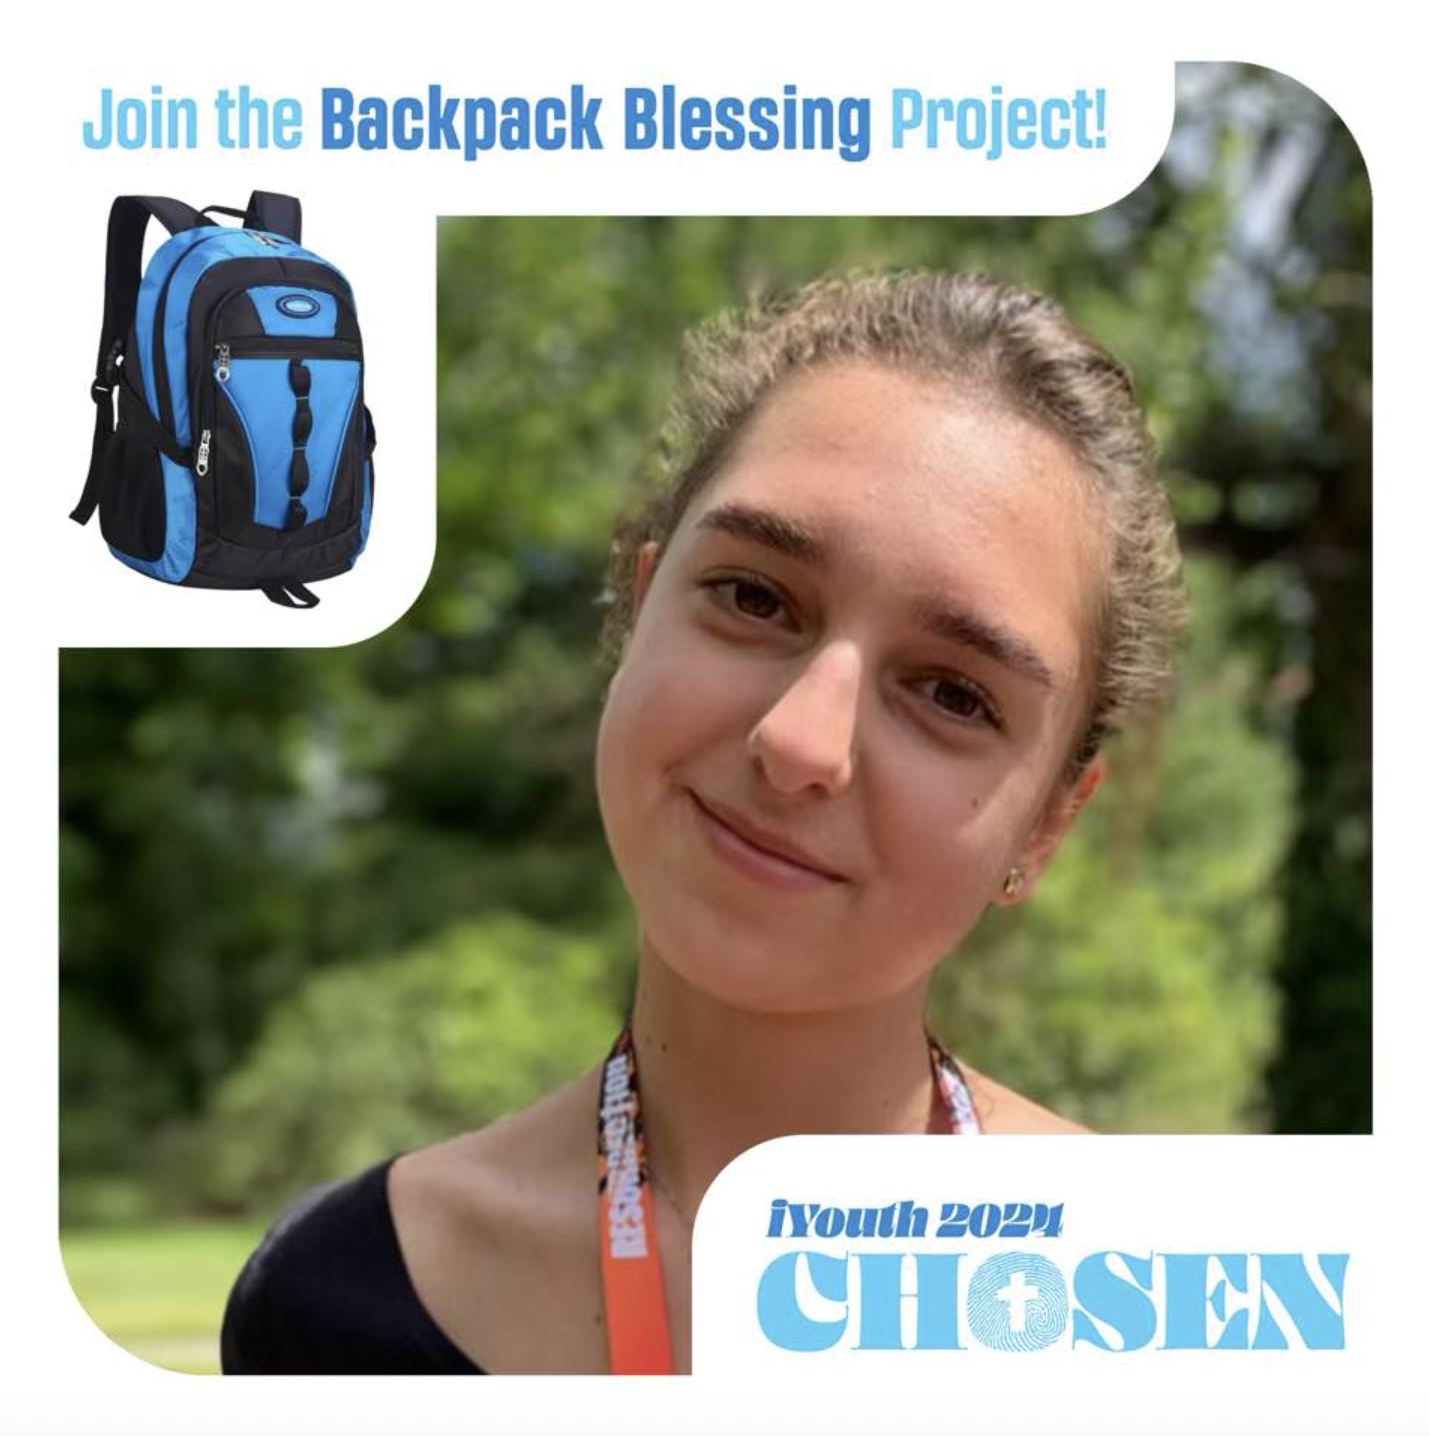 Join the Backpack Blessing Project for Ukrainian Teenagers!